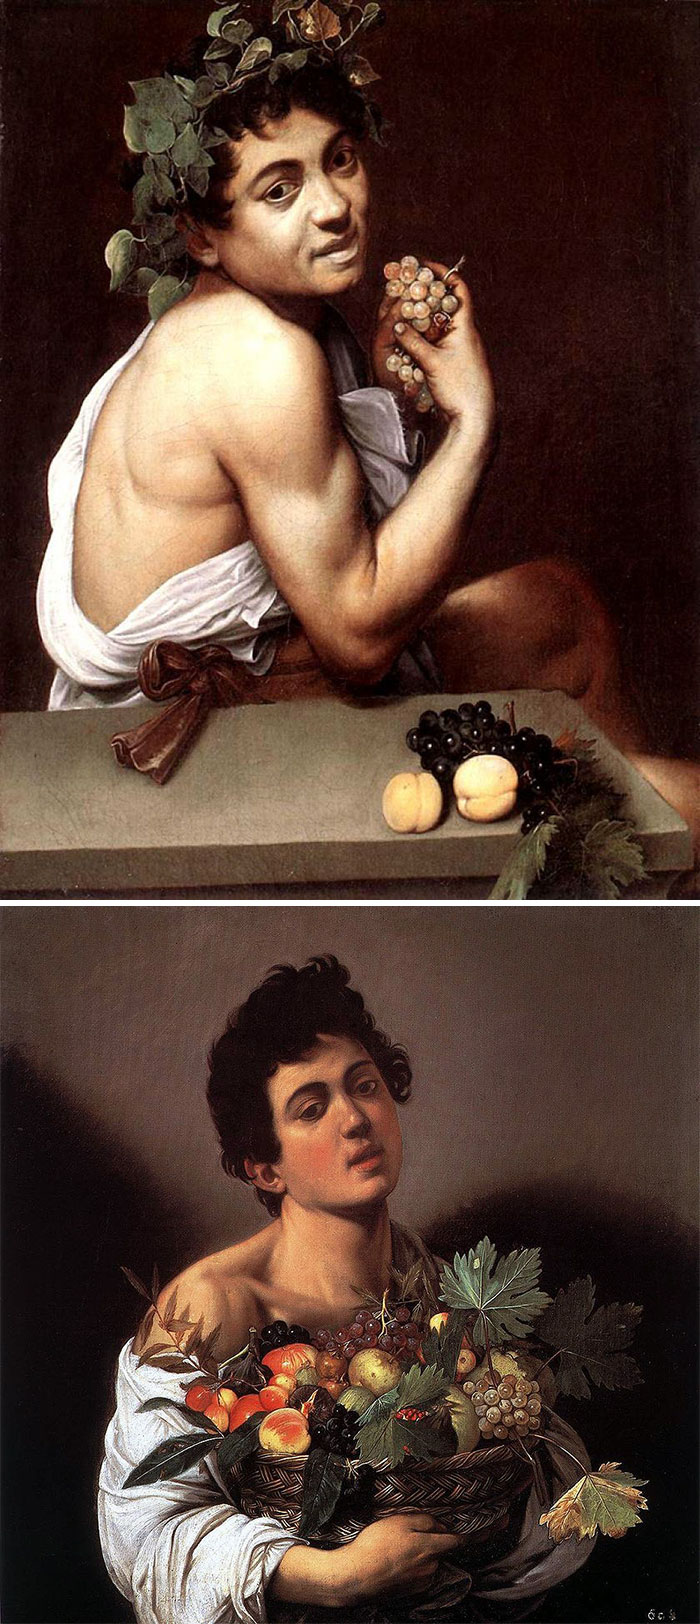 If All The Men Look Like Cow-Eyed Curly-Haired Women, It’s Caravaggio